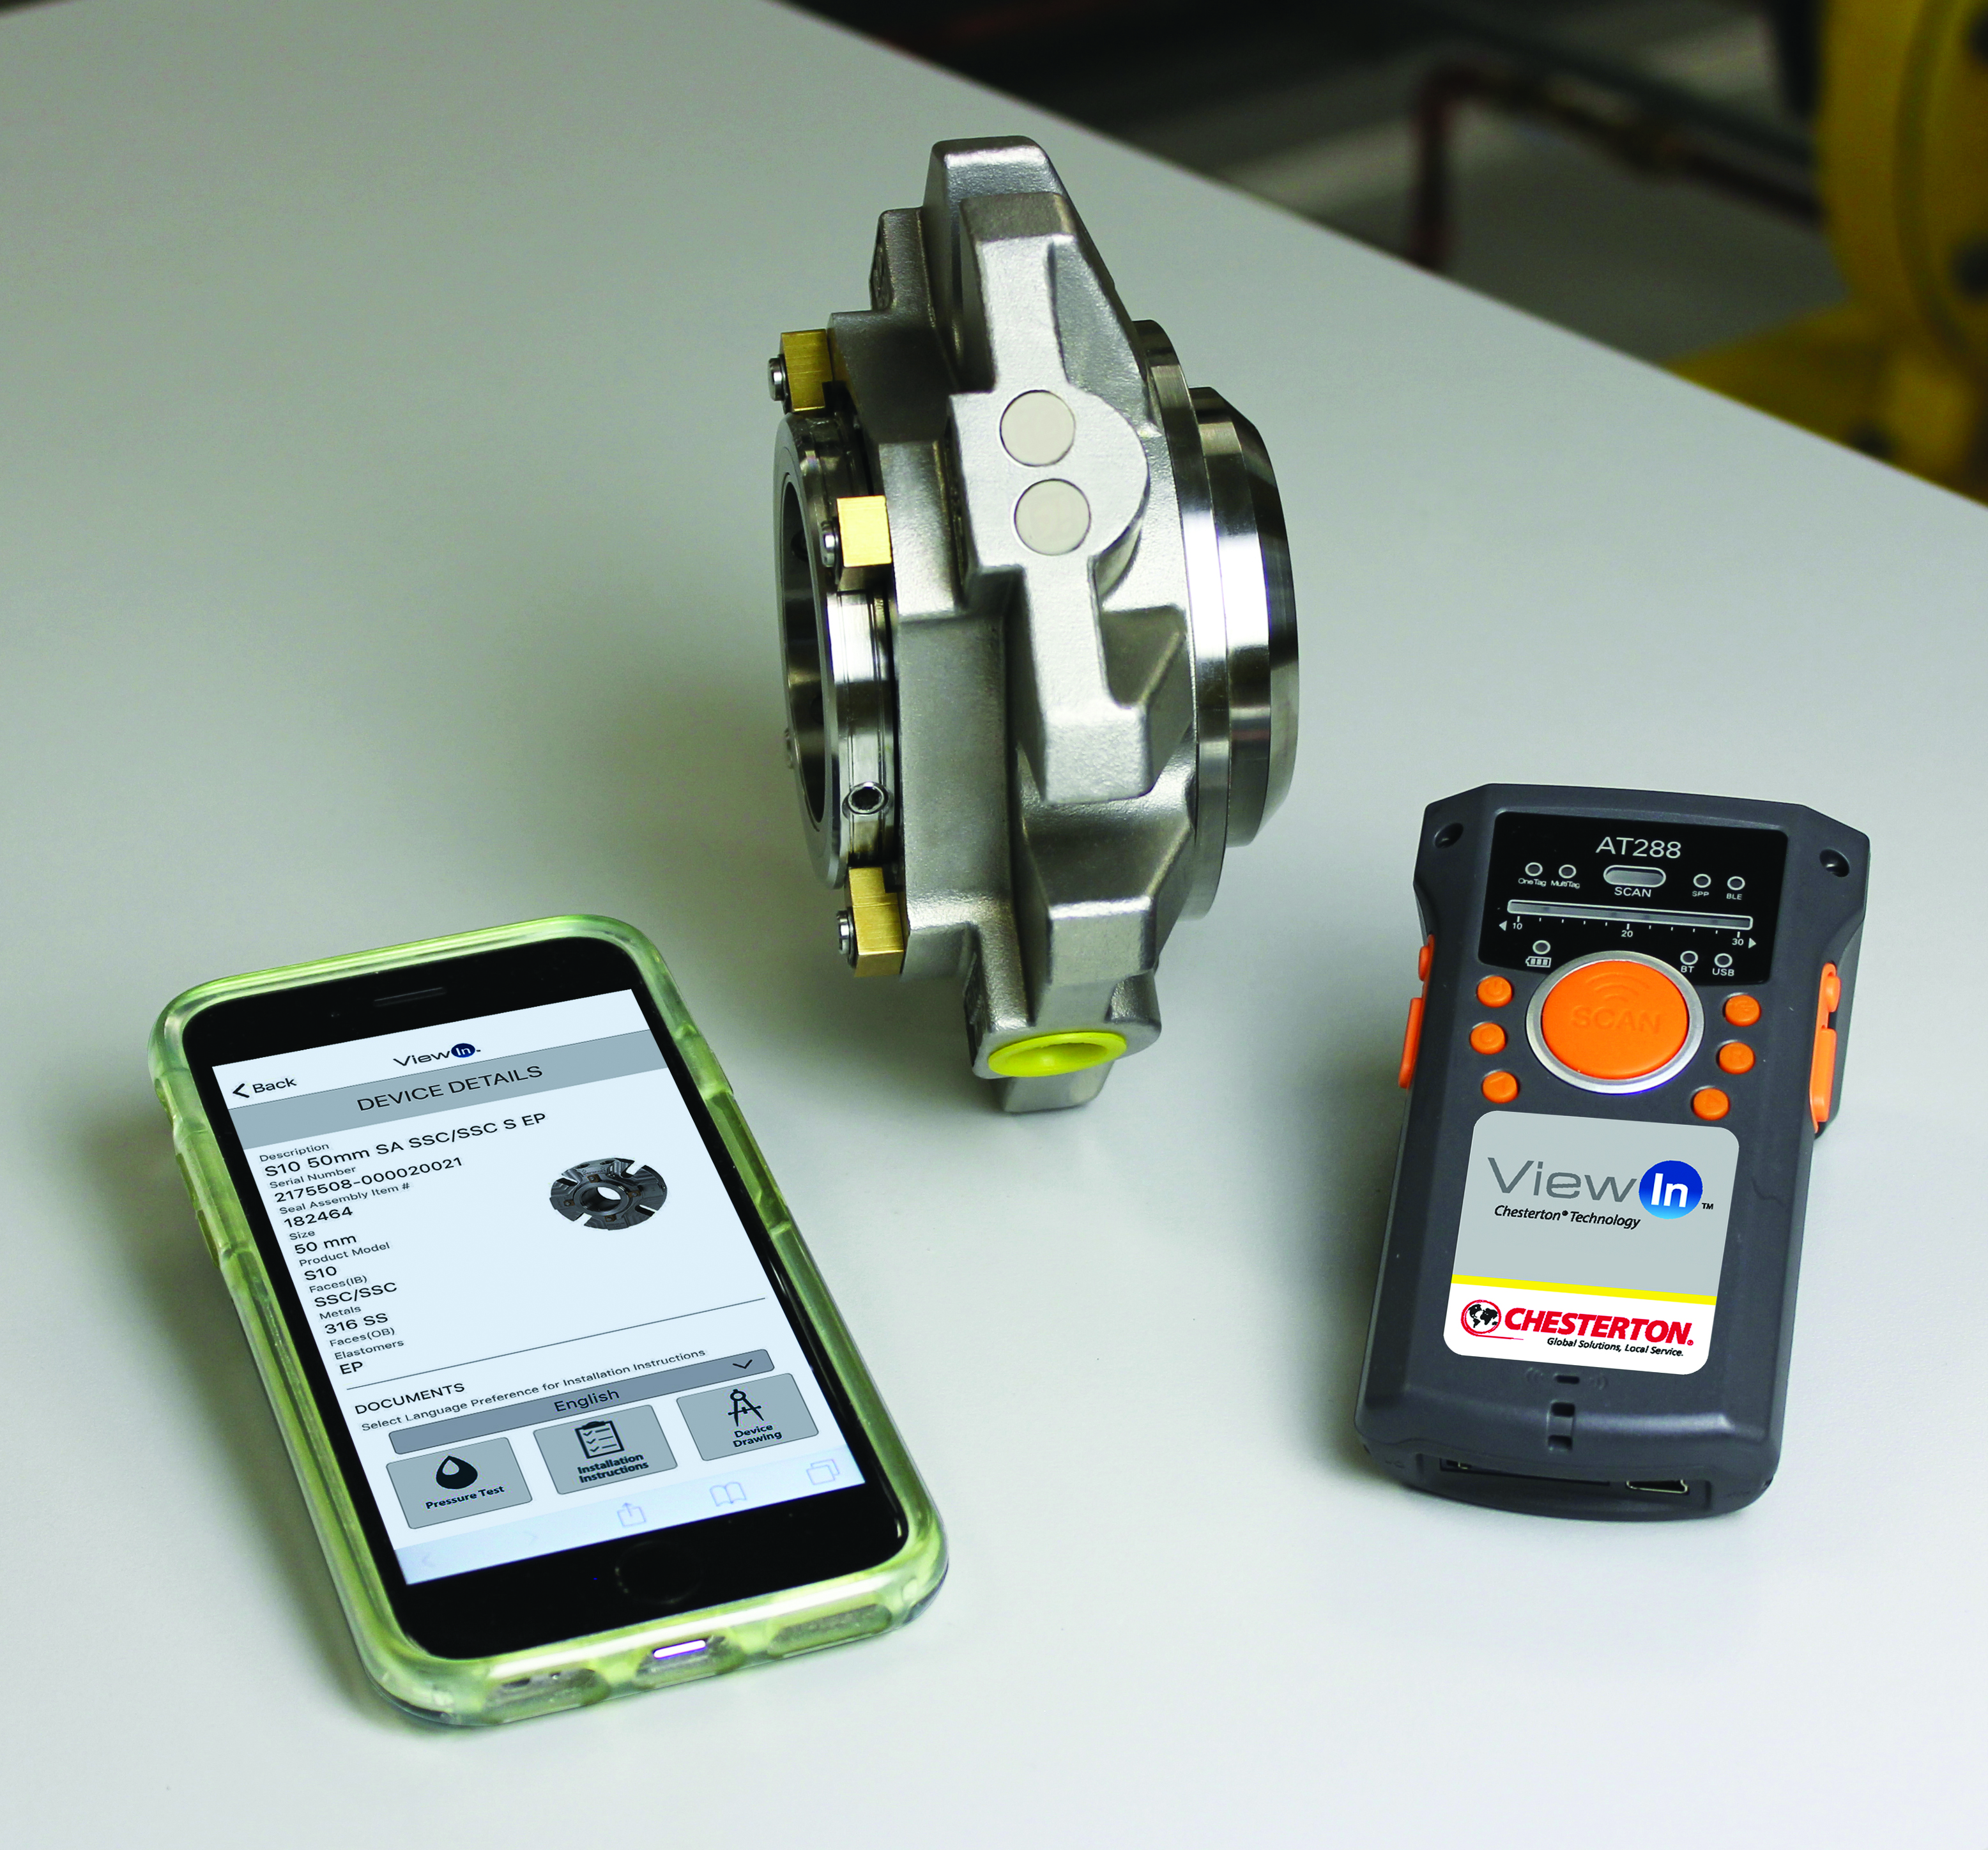 Each ViewIn-enabled Chesterton seal is equipped with Radio-frequency identification (RFID) tags that can be read using a Bluetooth-connected RFID reader.